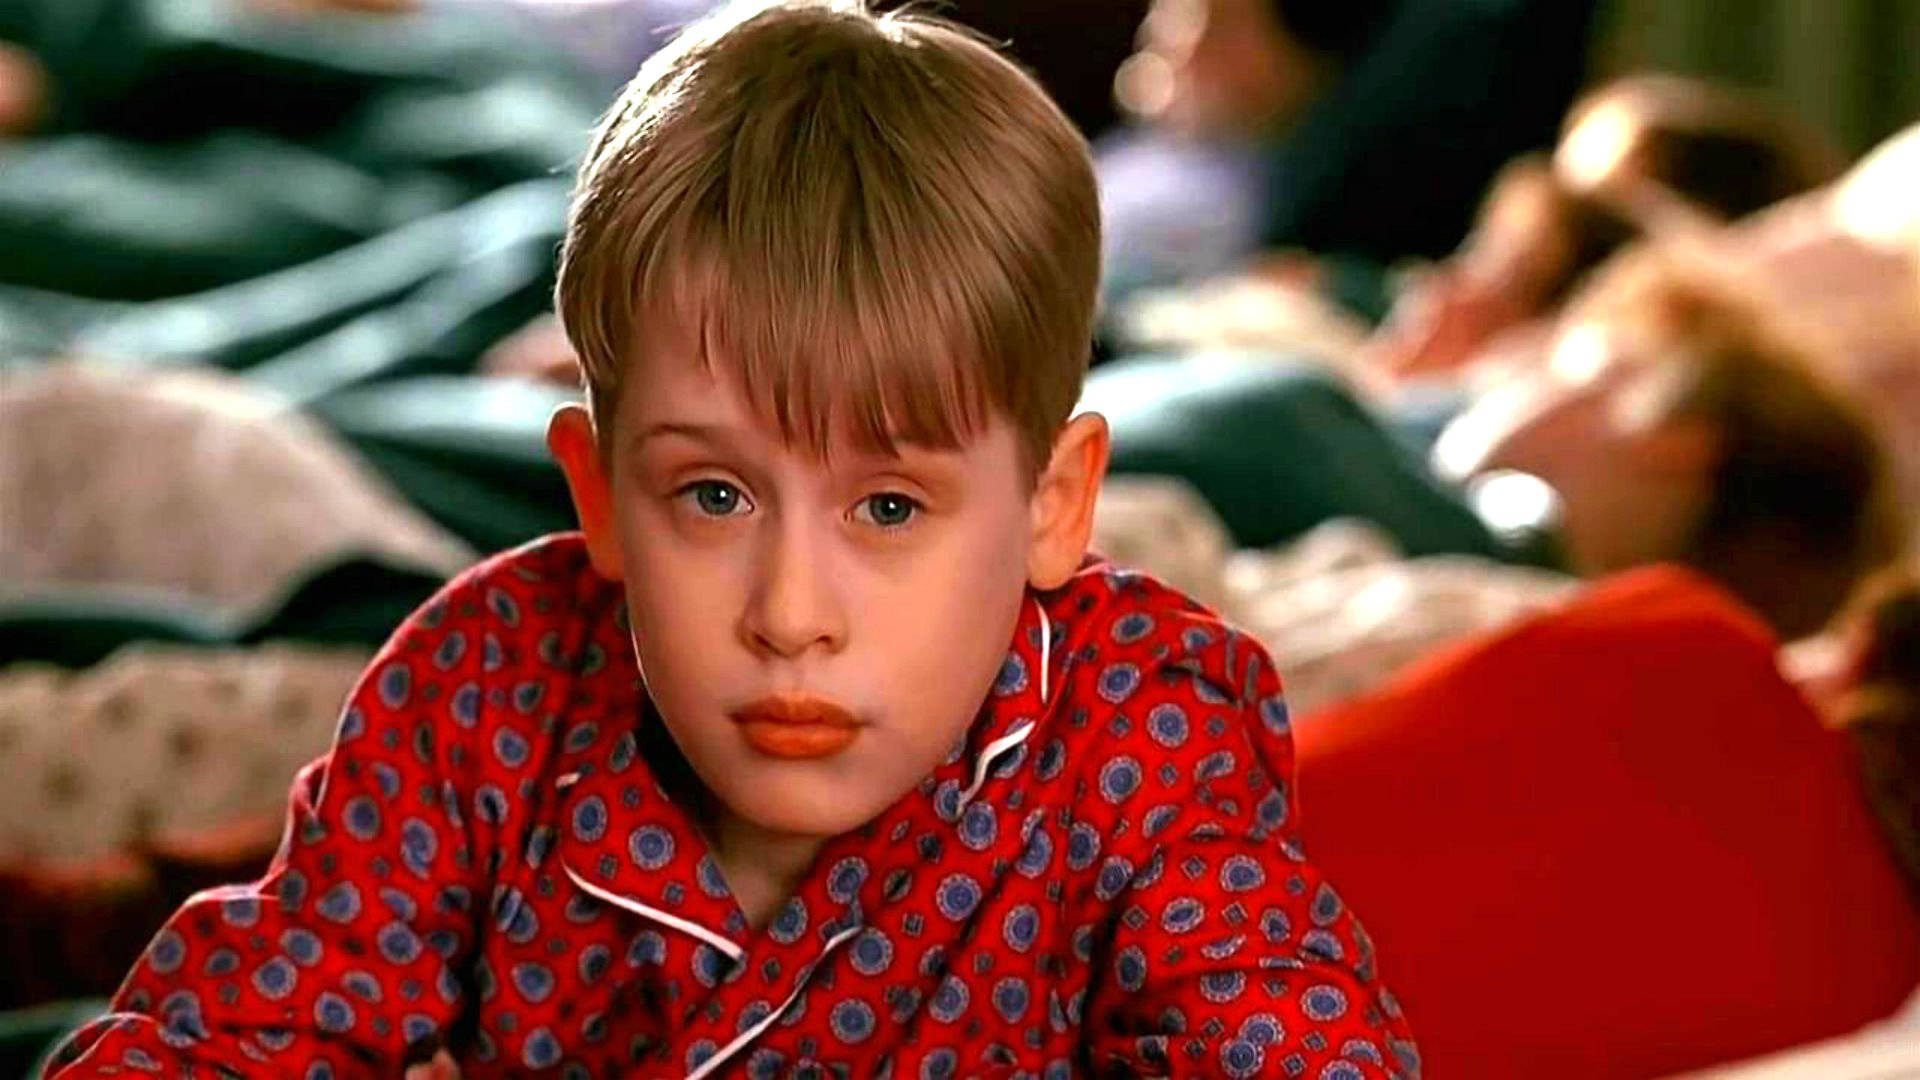 Home Alone Kevin In Pajamas Wallpaper